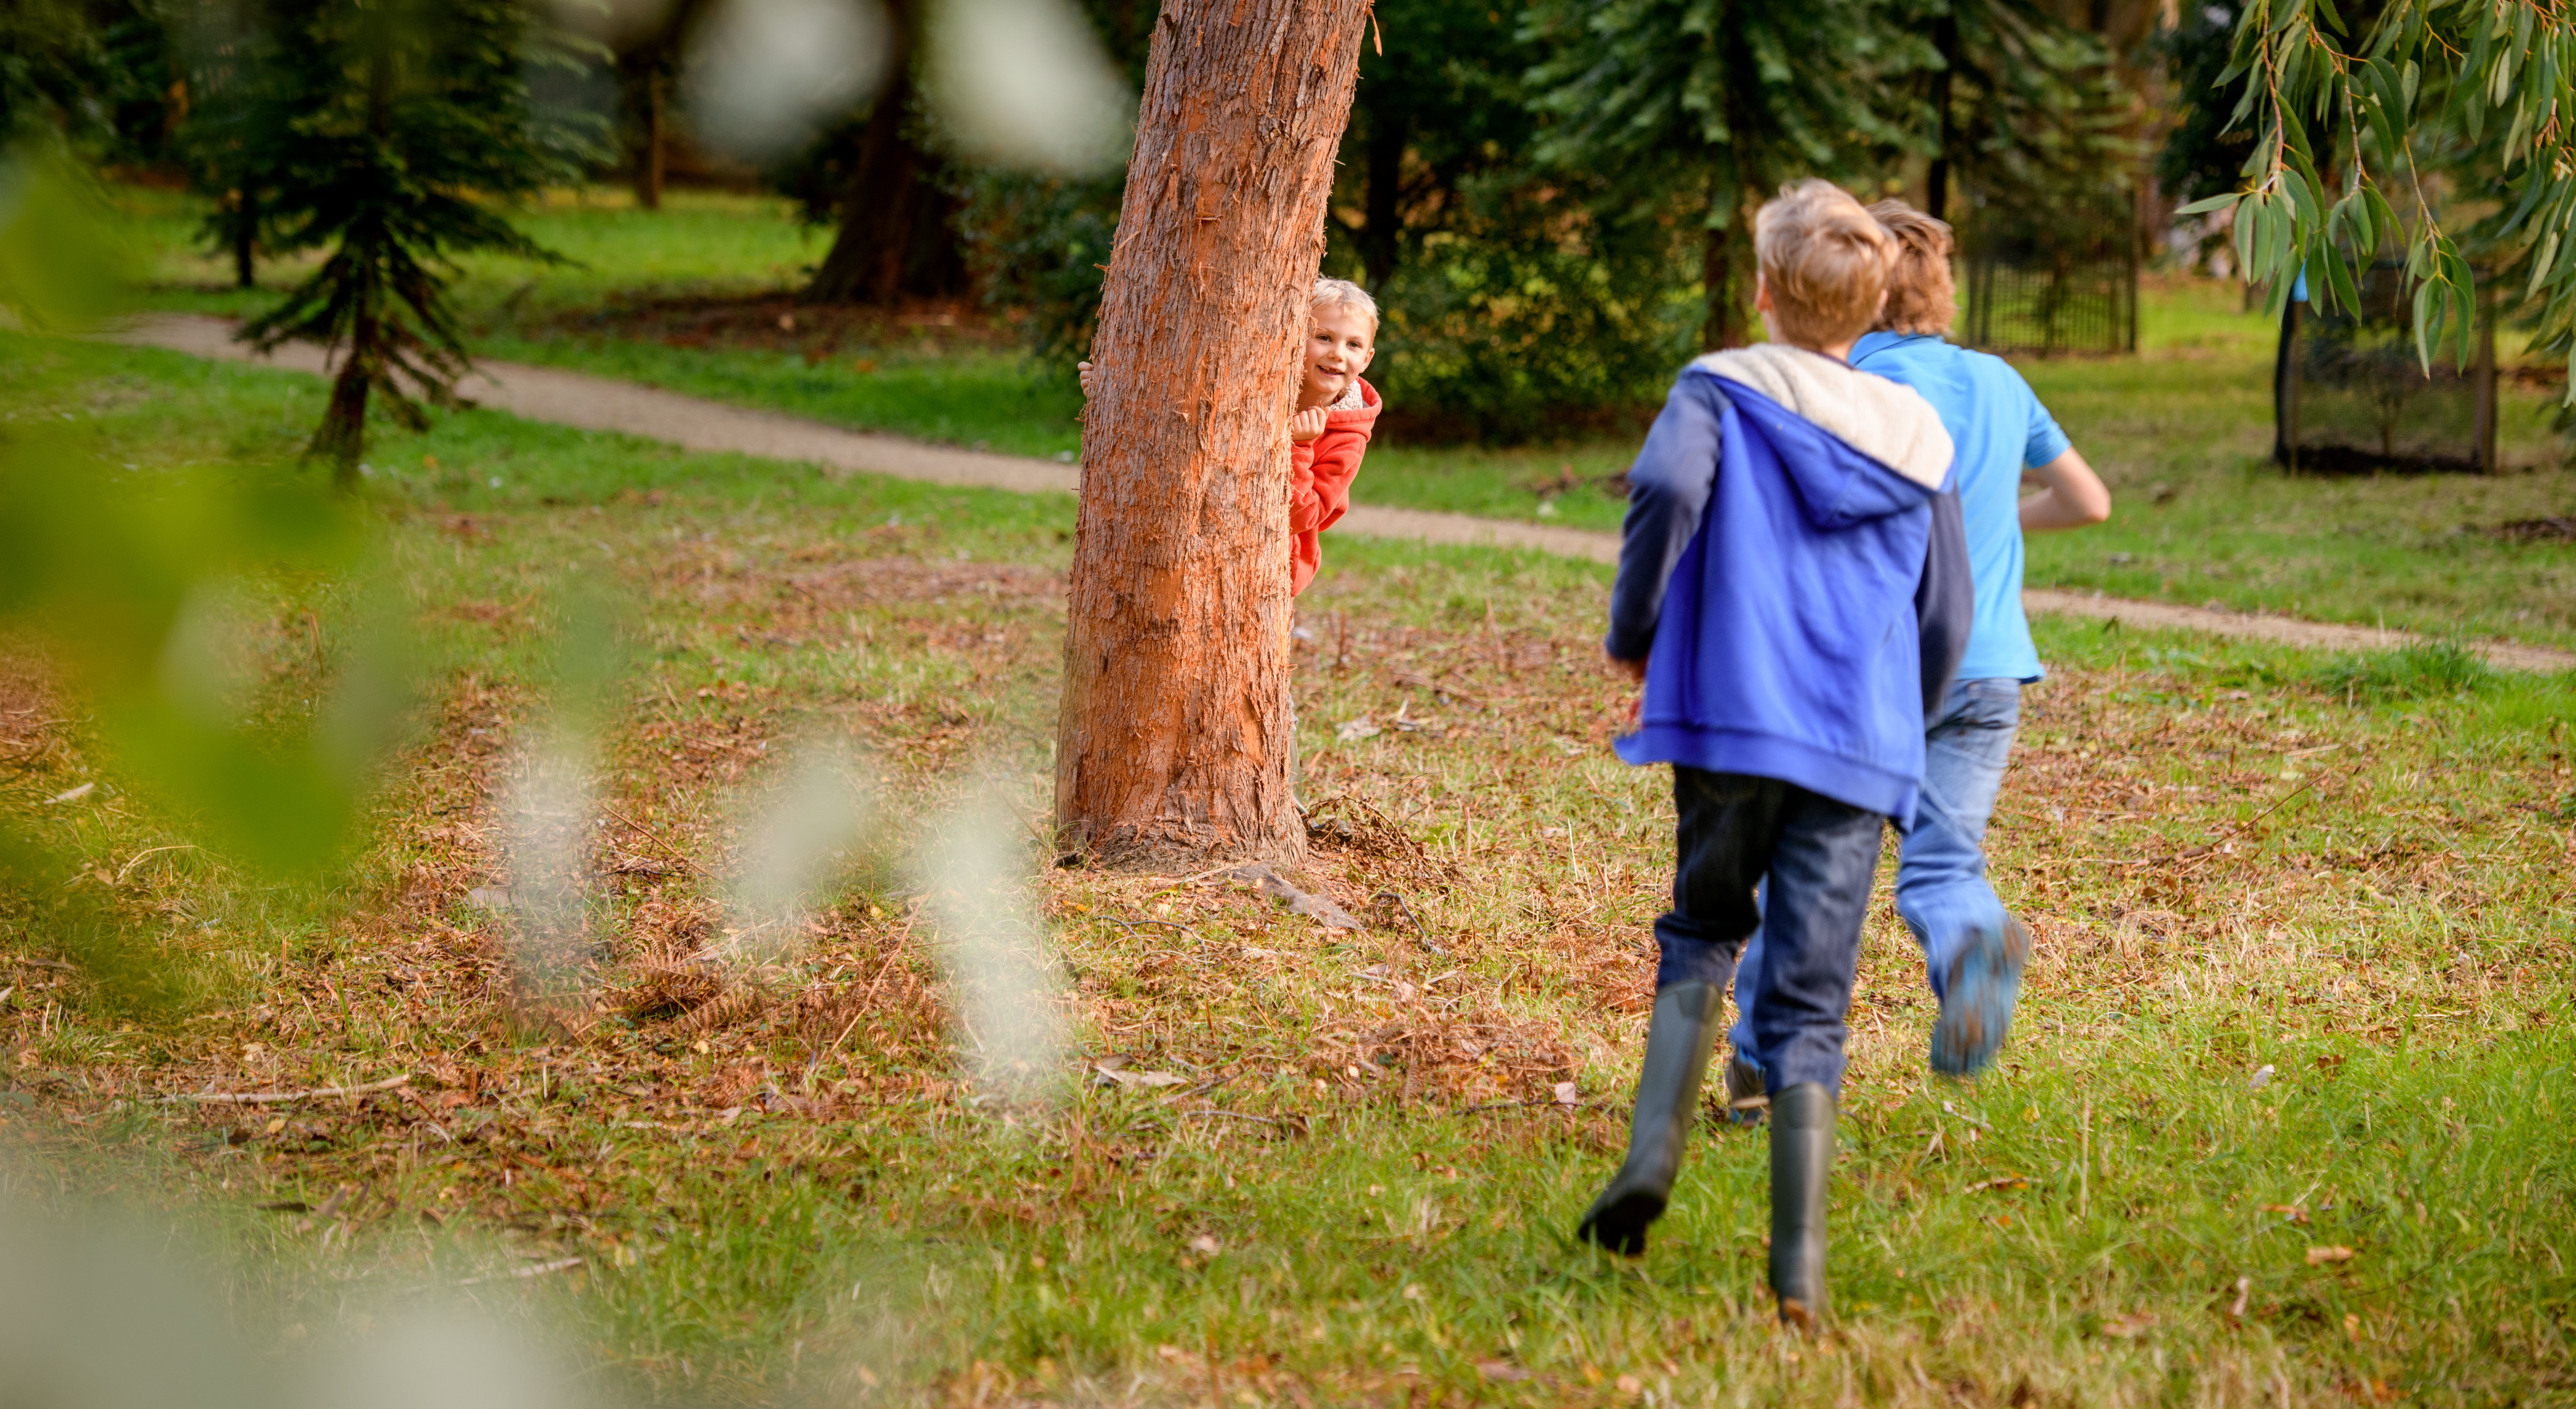 Children running in a wooded area